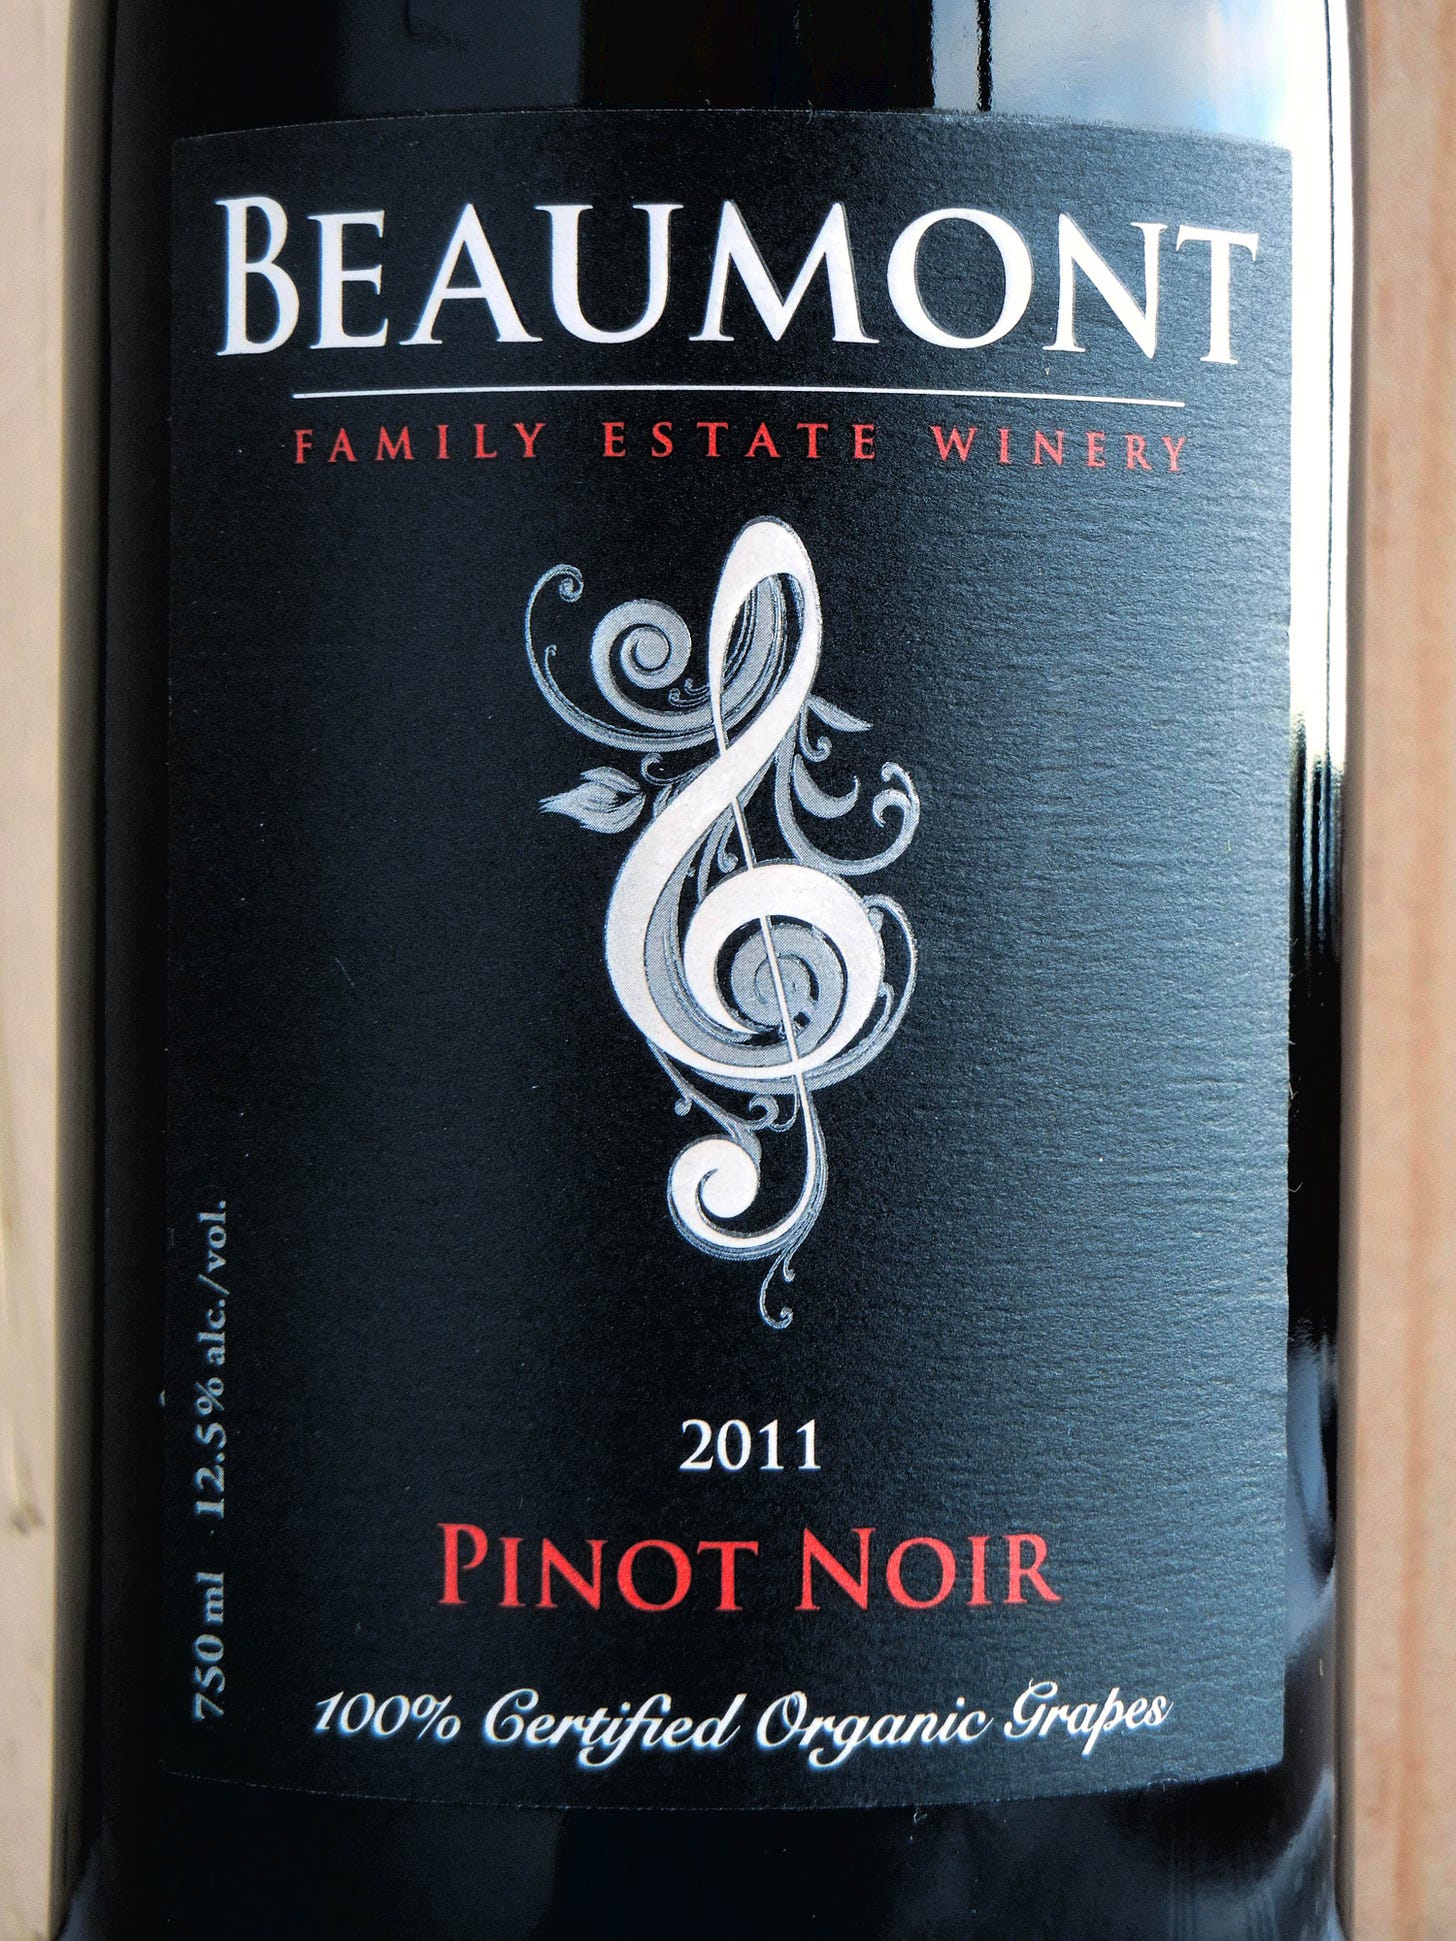 Beaumont Pinot Noir 2011 Label - BC Pinot Noir Tasting Review 13